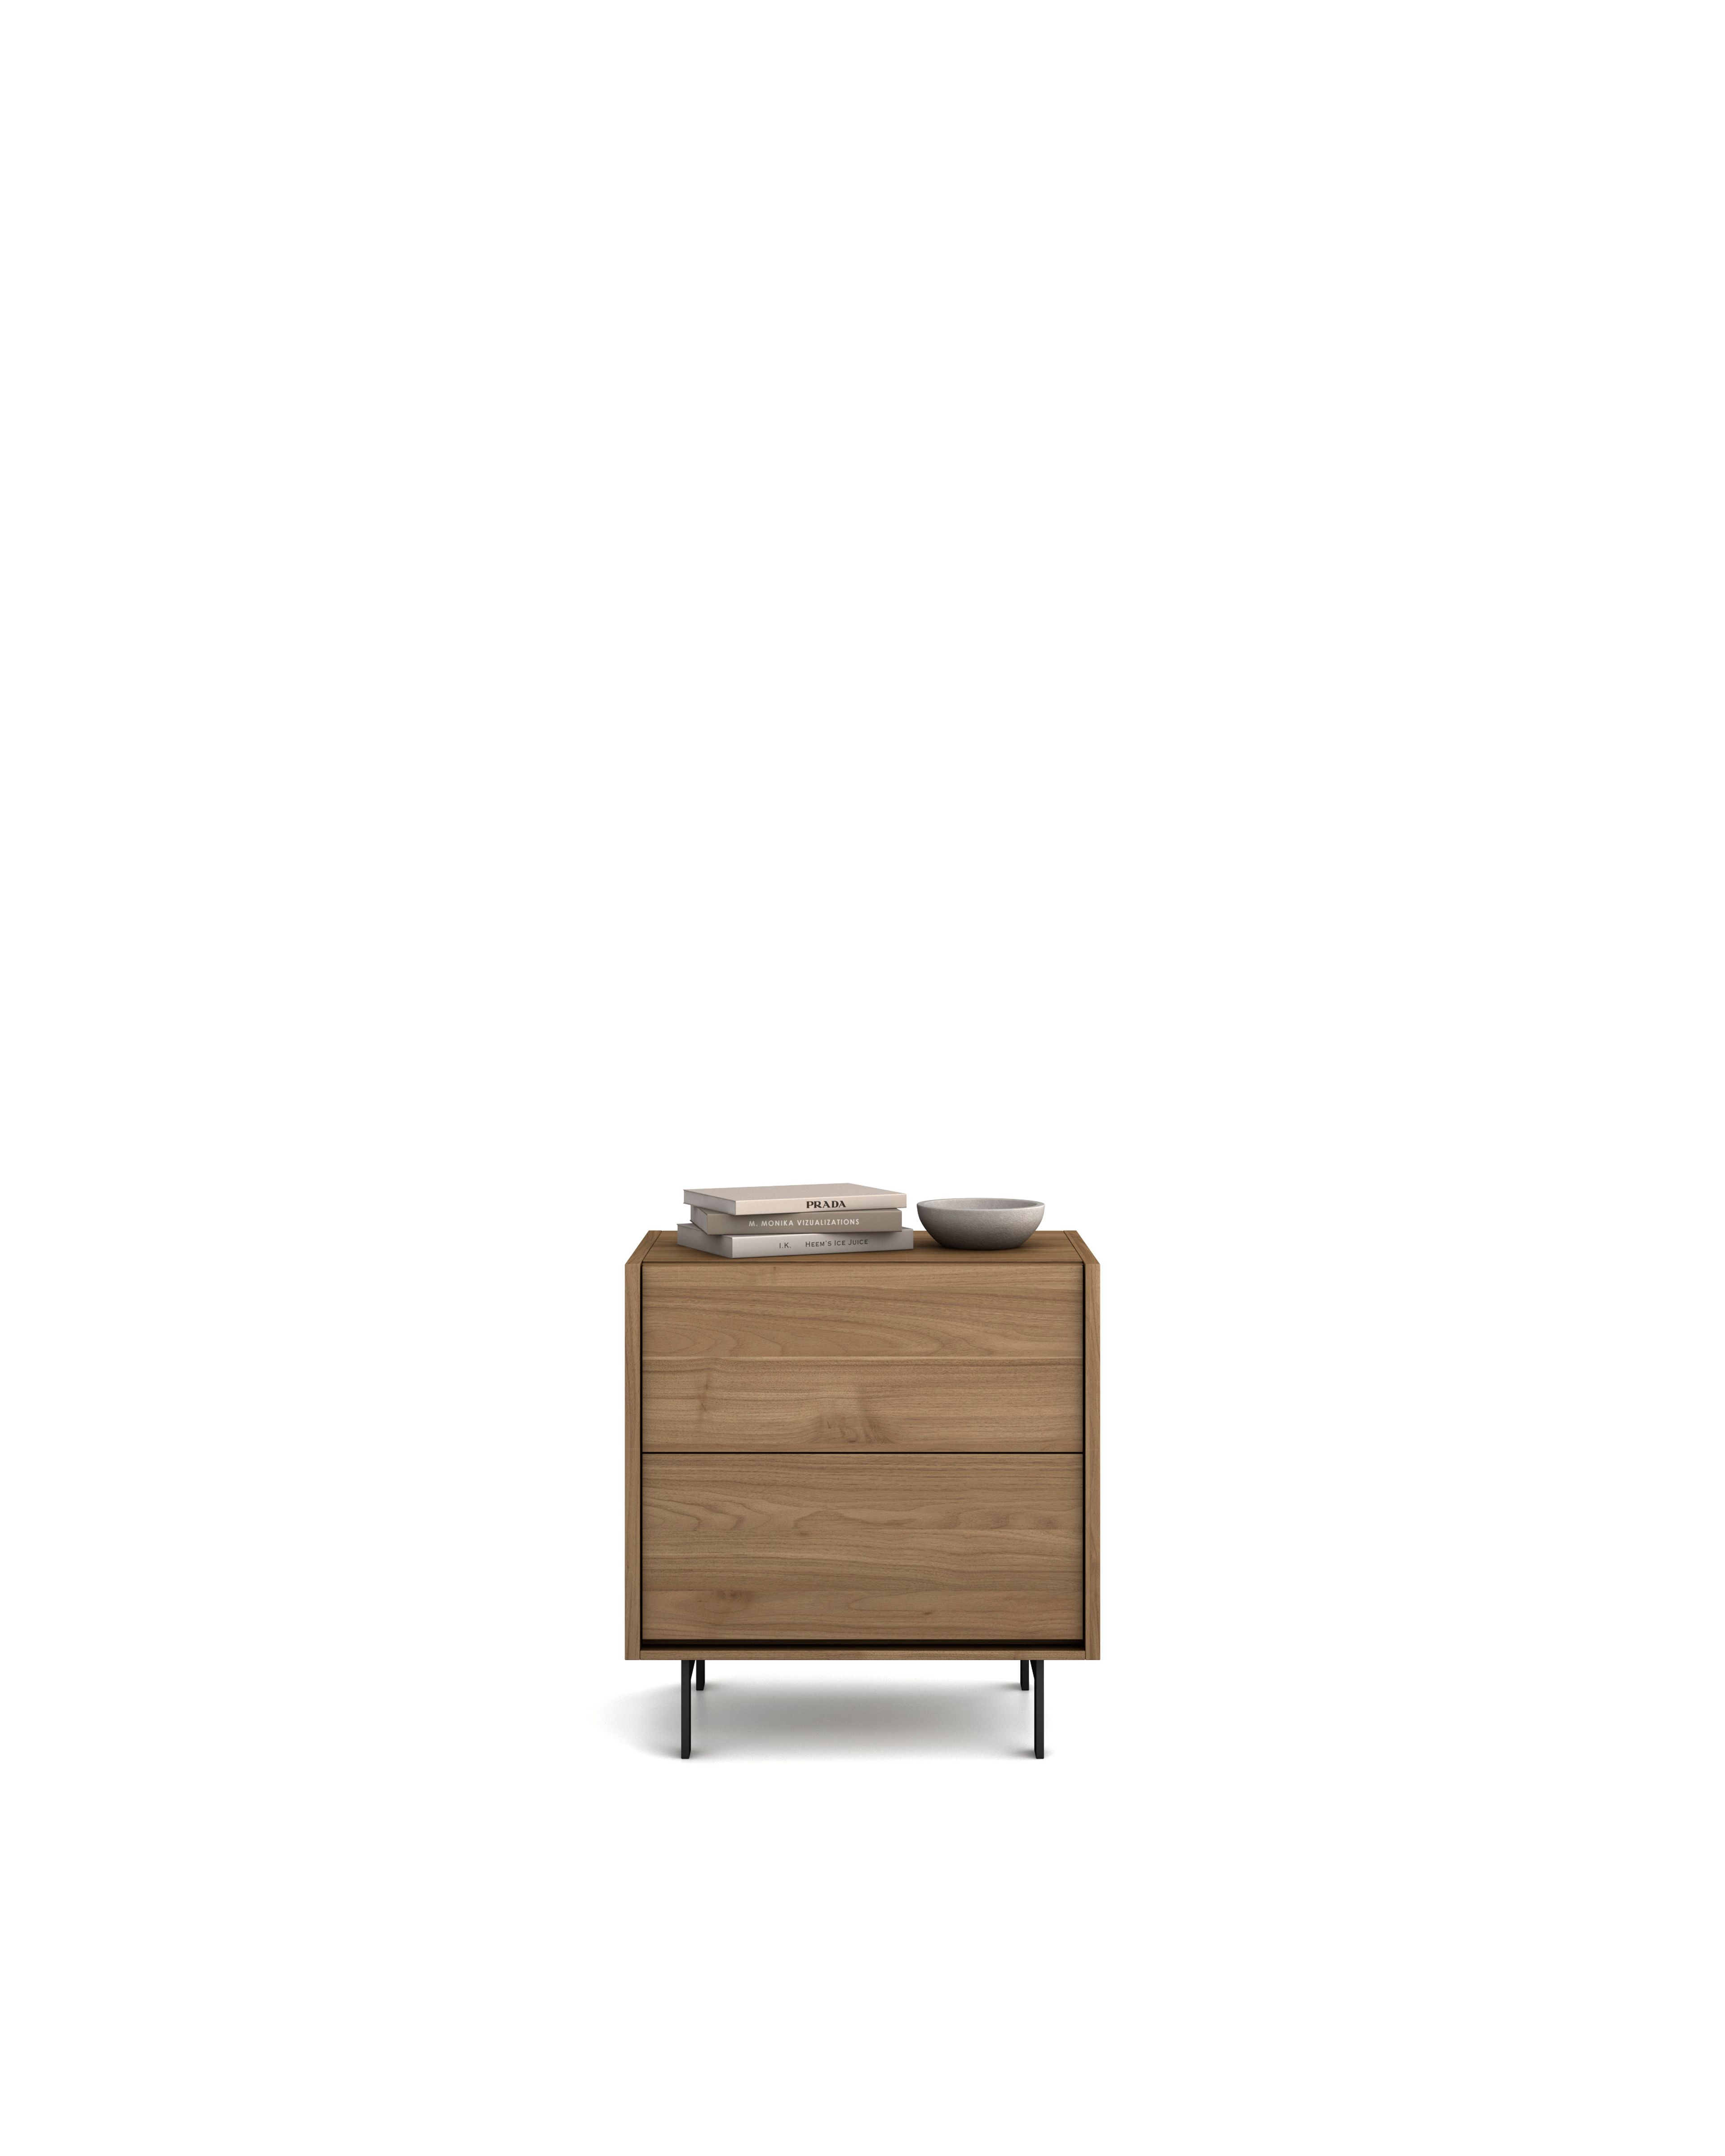 Nativ table with 2 drawers.